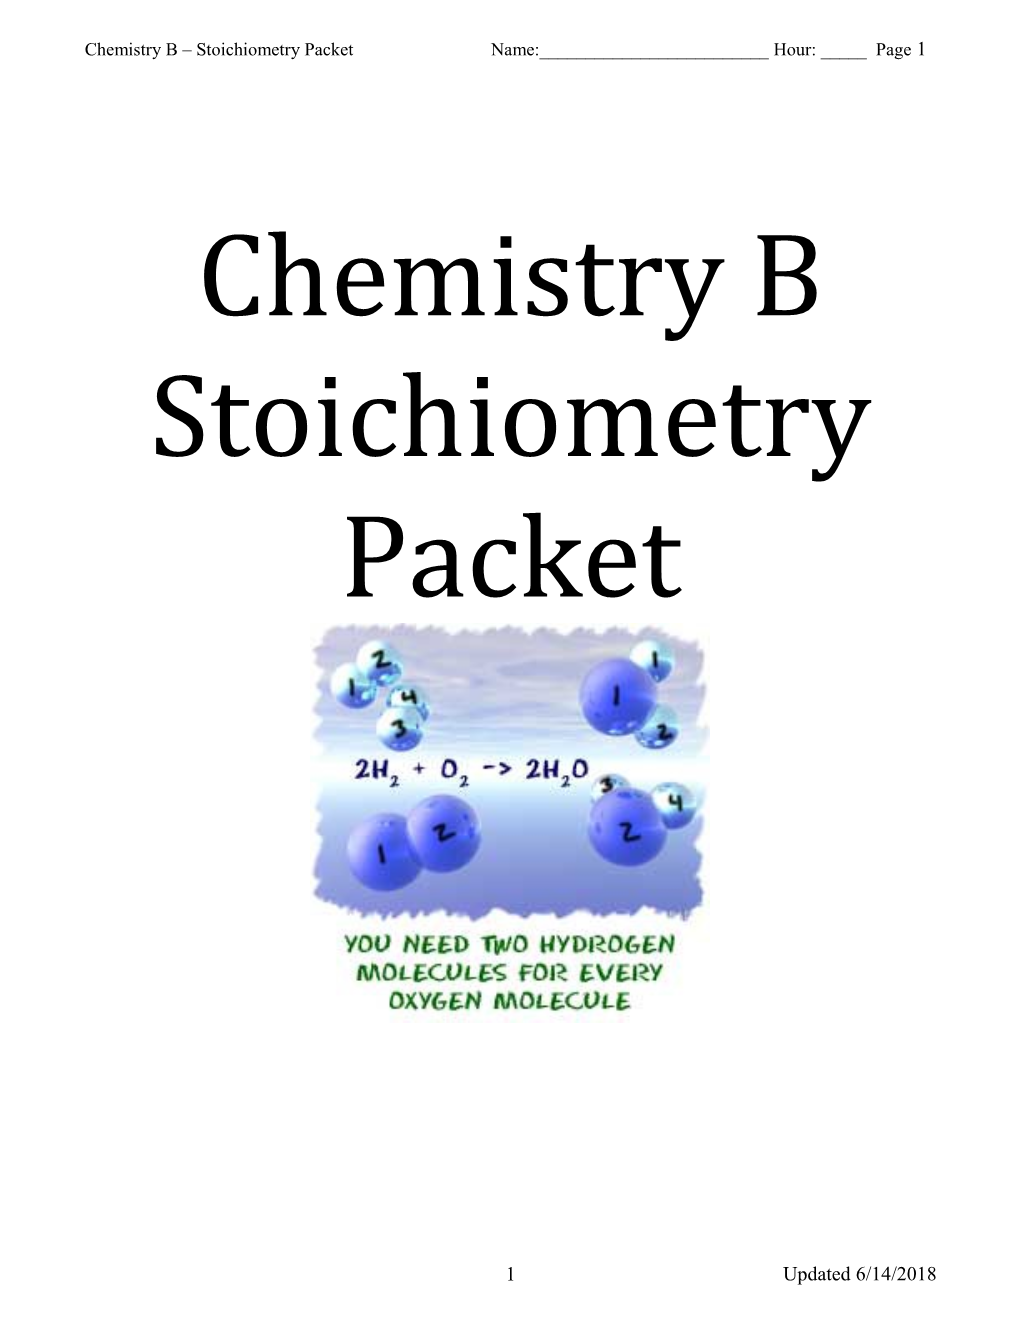 Chemistry B Stoichiometry Packet Name:______Hour: _____ Page 6